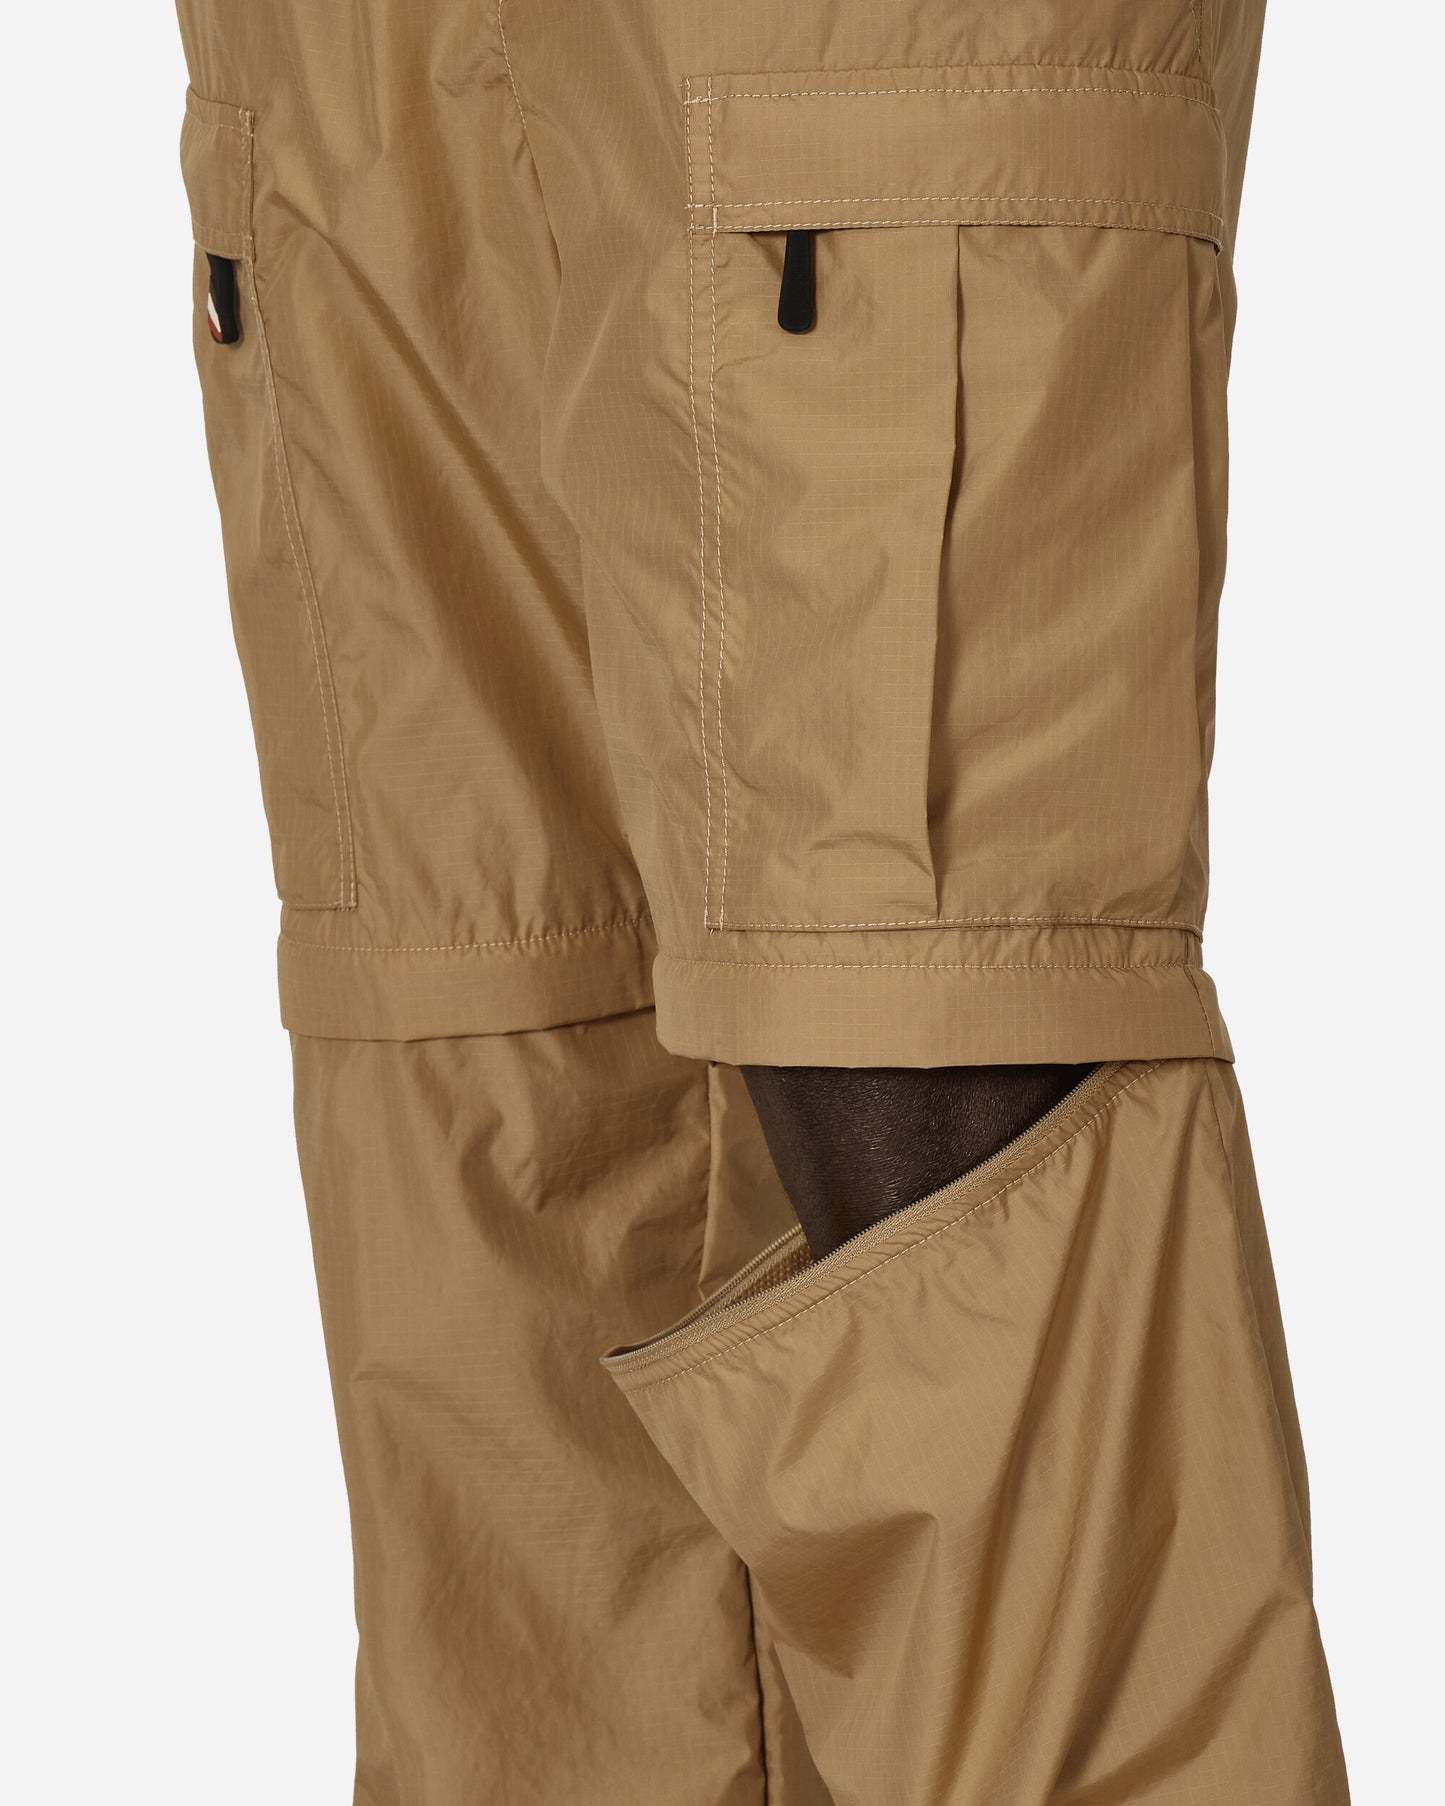 Moncler Grenoble Trousers Day-Namic Beige Pants Cargo 2A0000454A3E 226